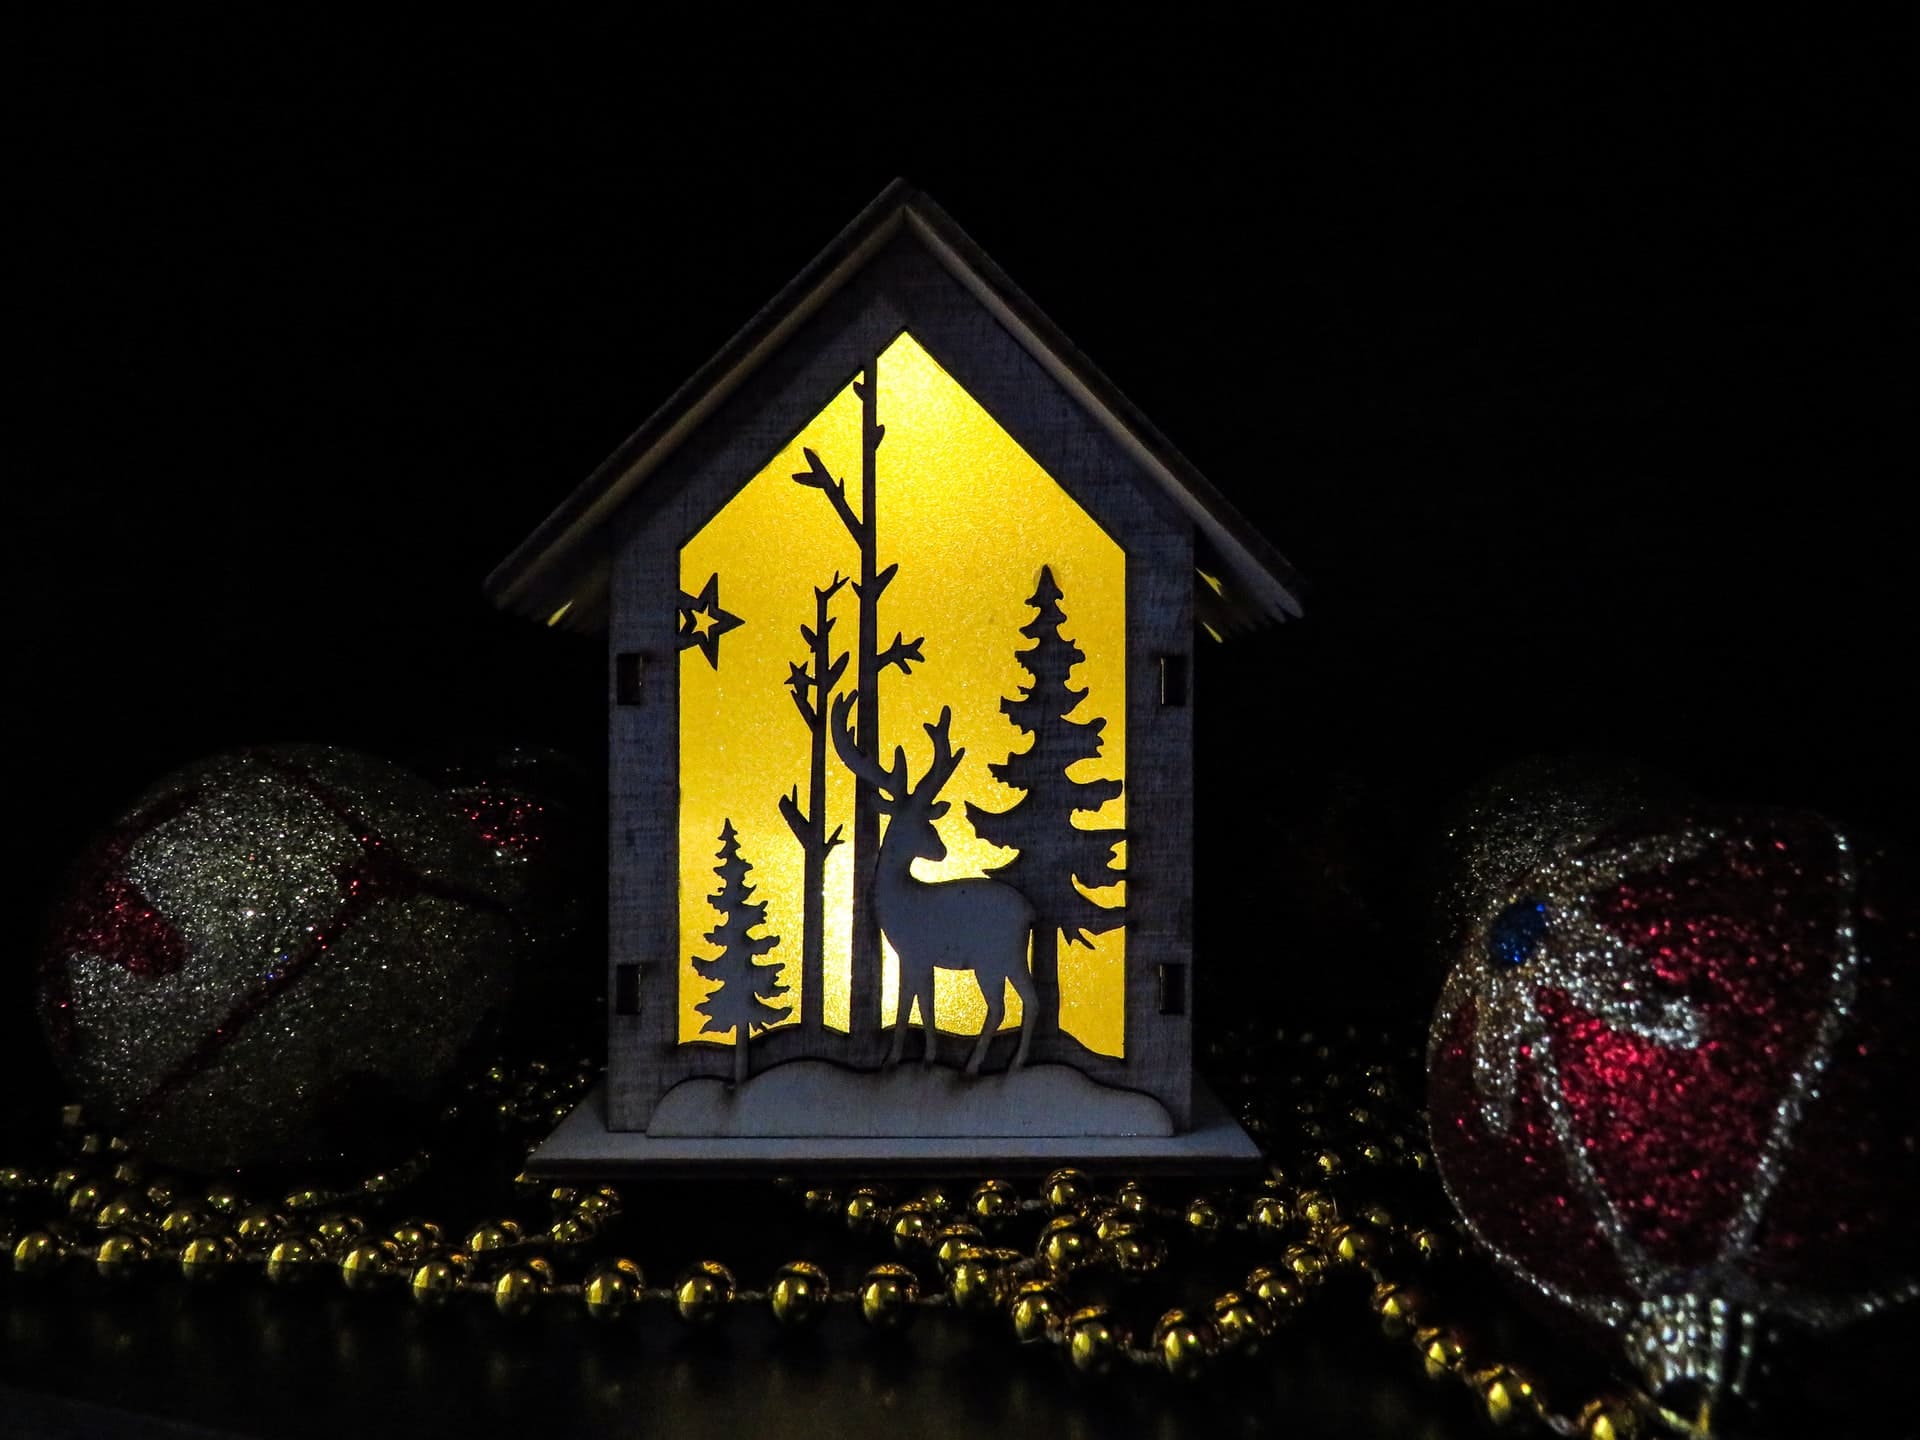 A decoration piece of a reindeer to symbolize the holiday season and the need for virtual parties